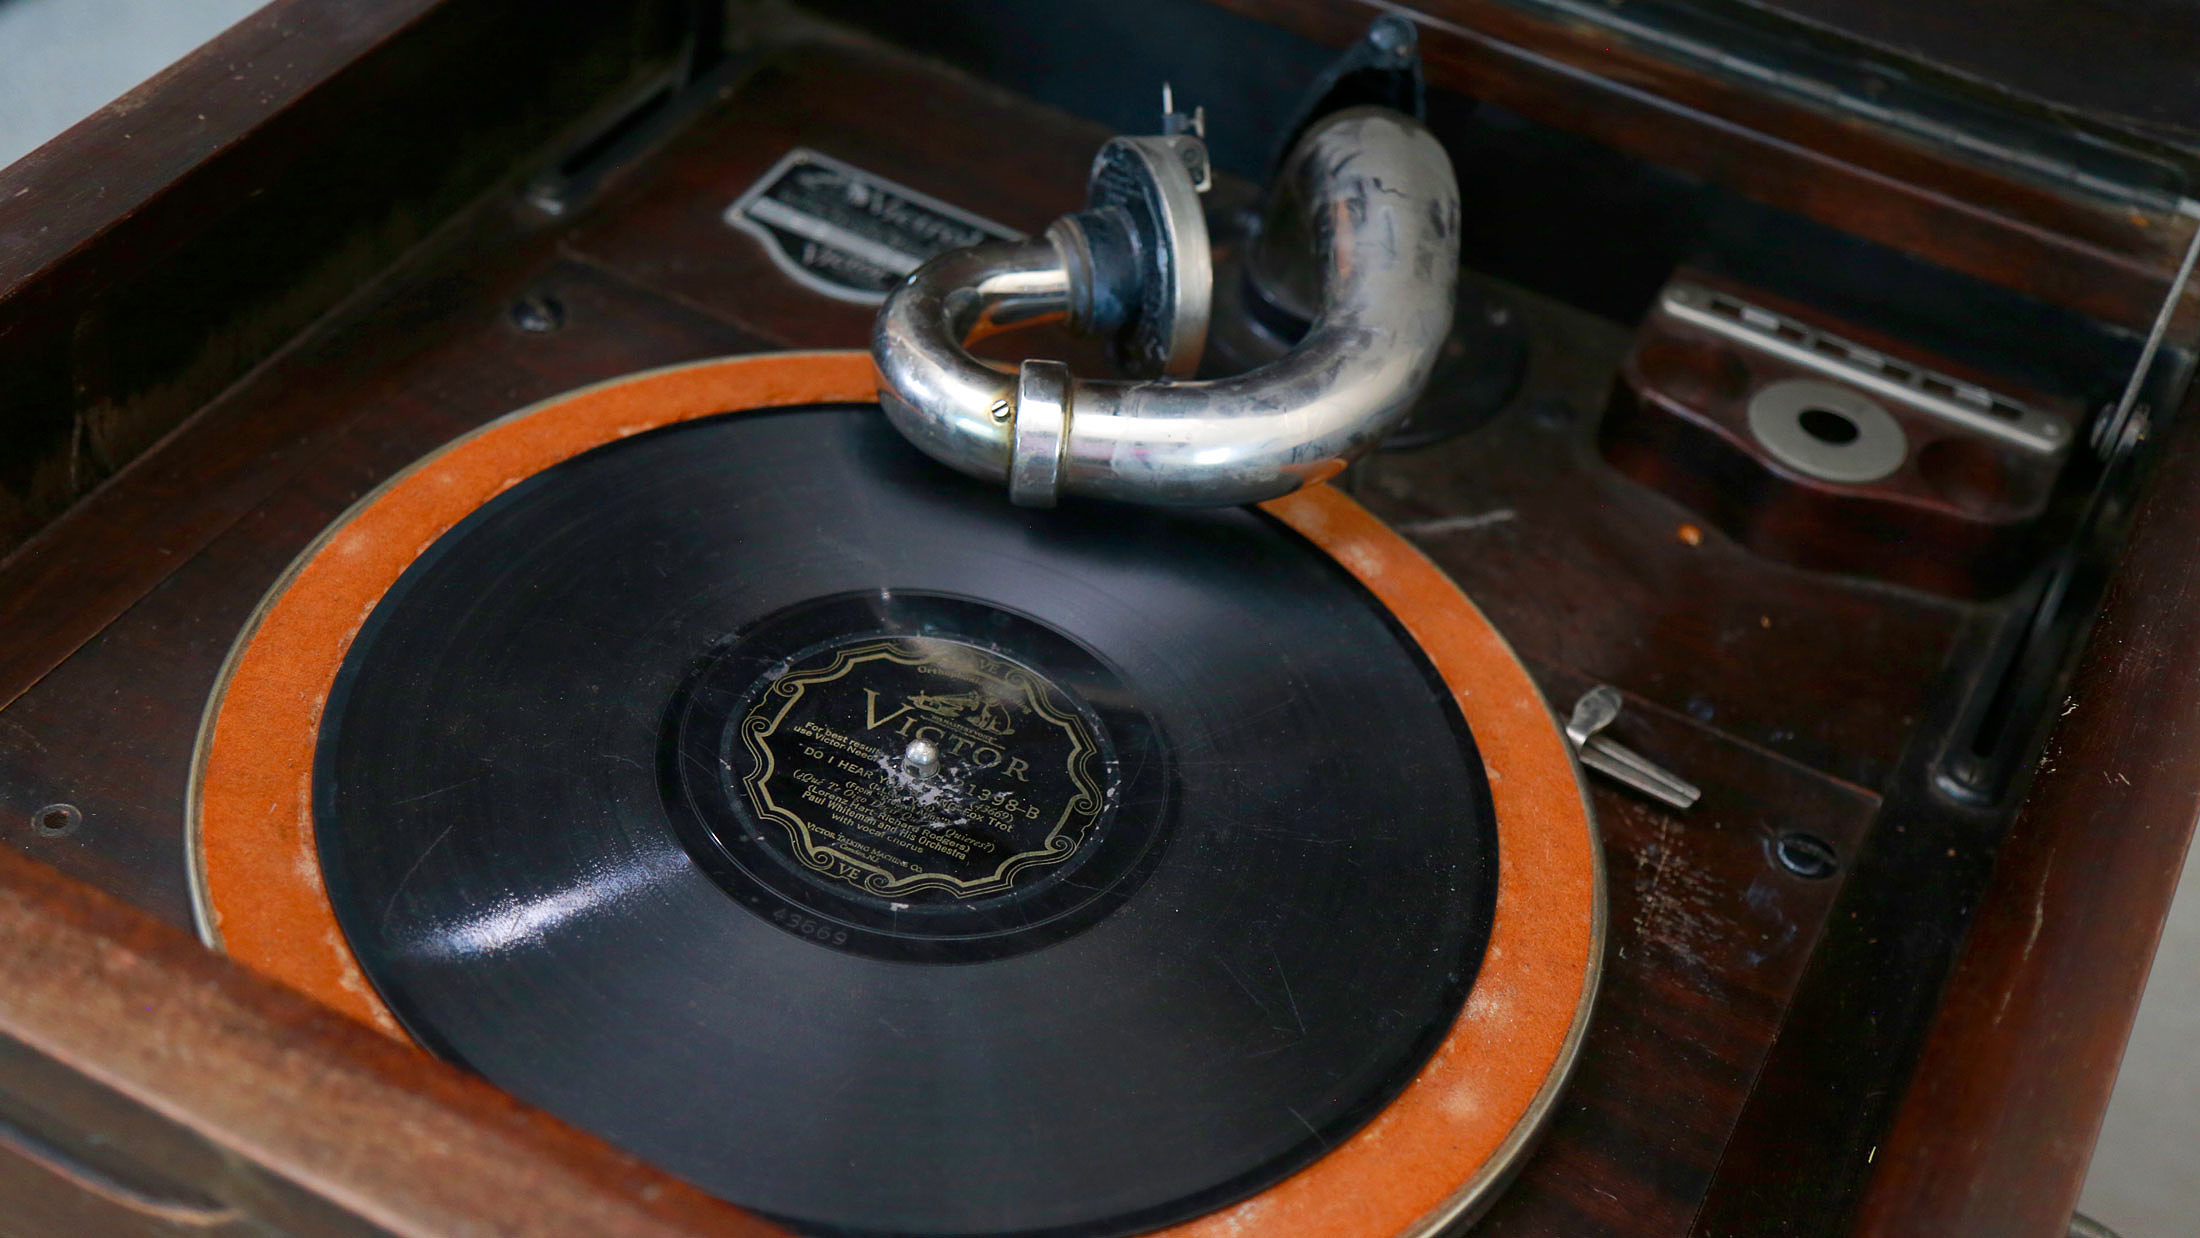 Very early phonograph with a record ready to play.